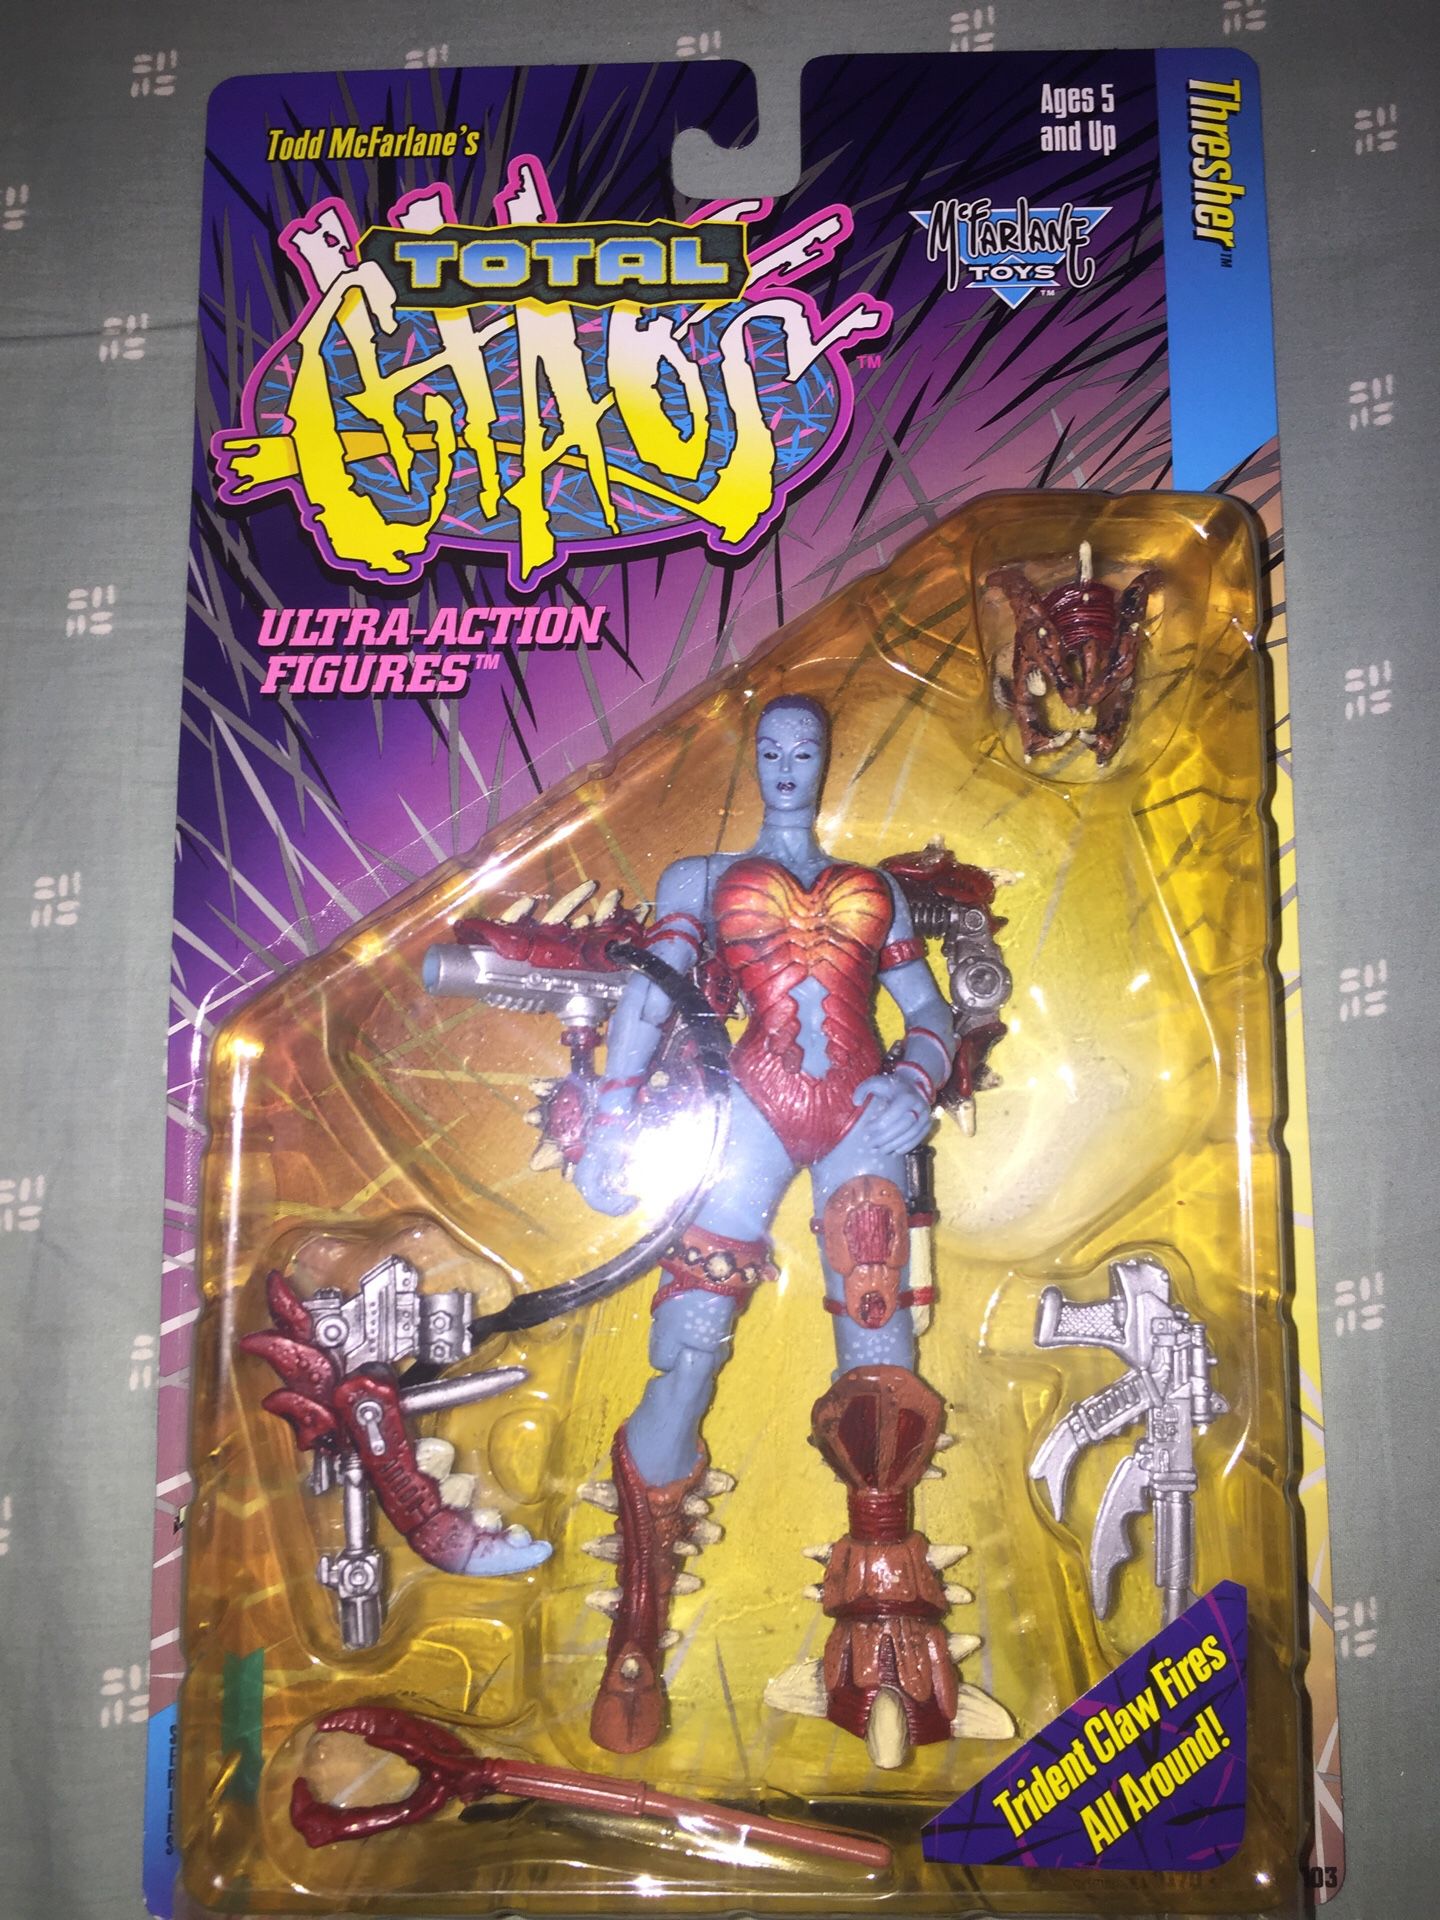 Total Chaos Thresher action figure